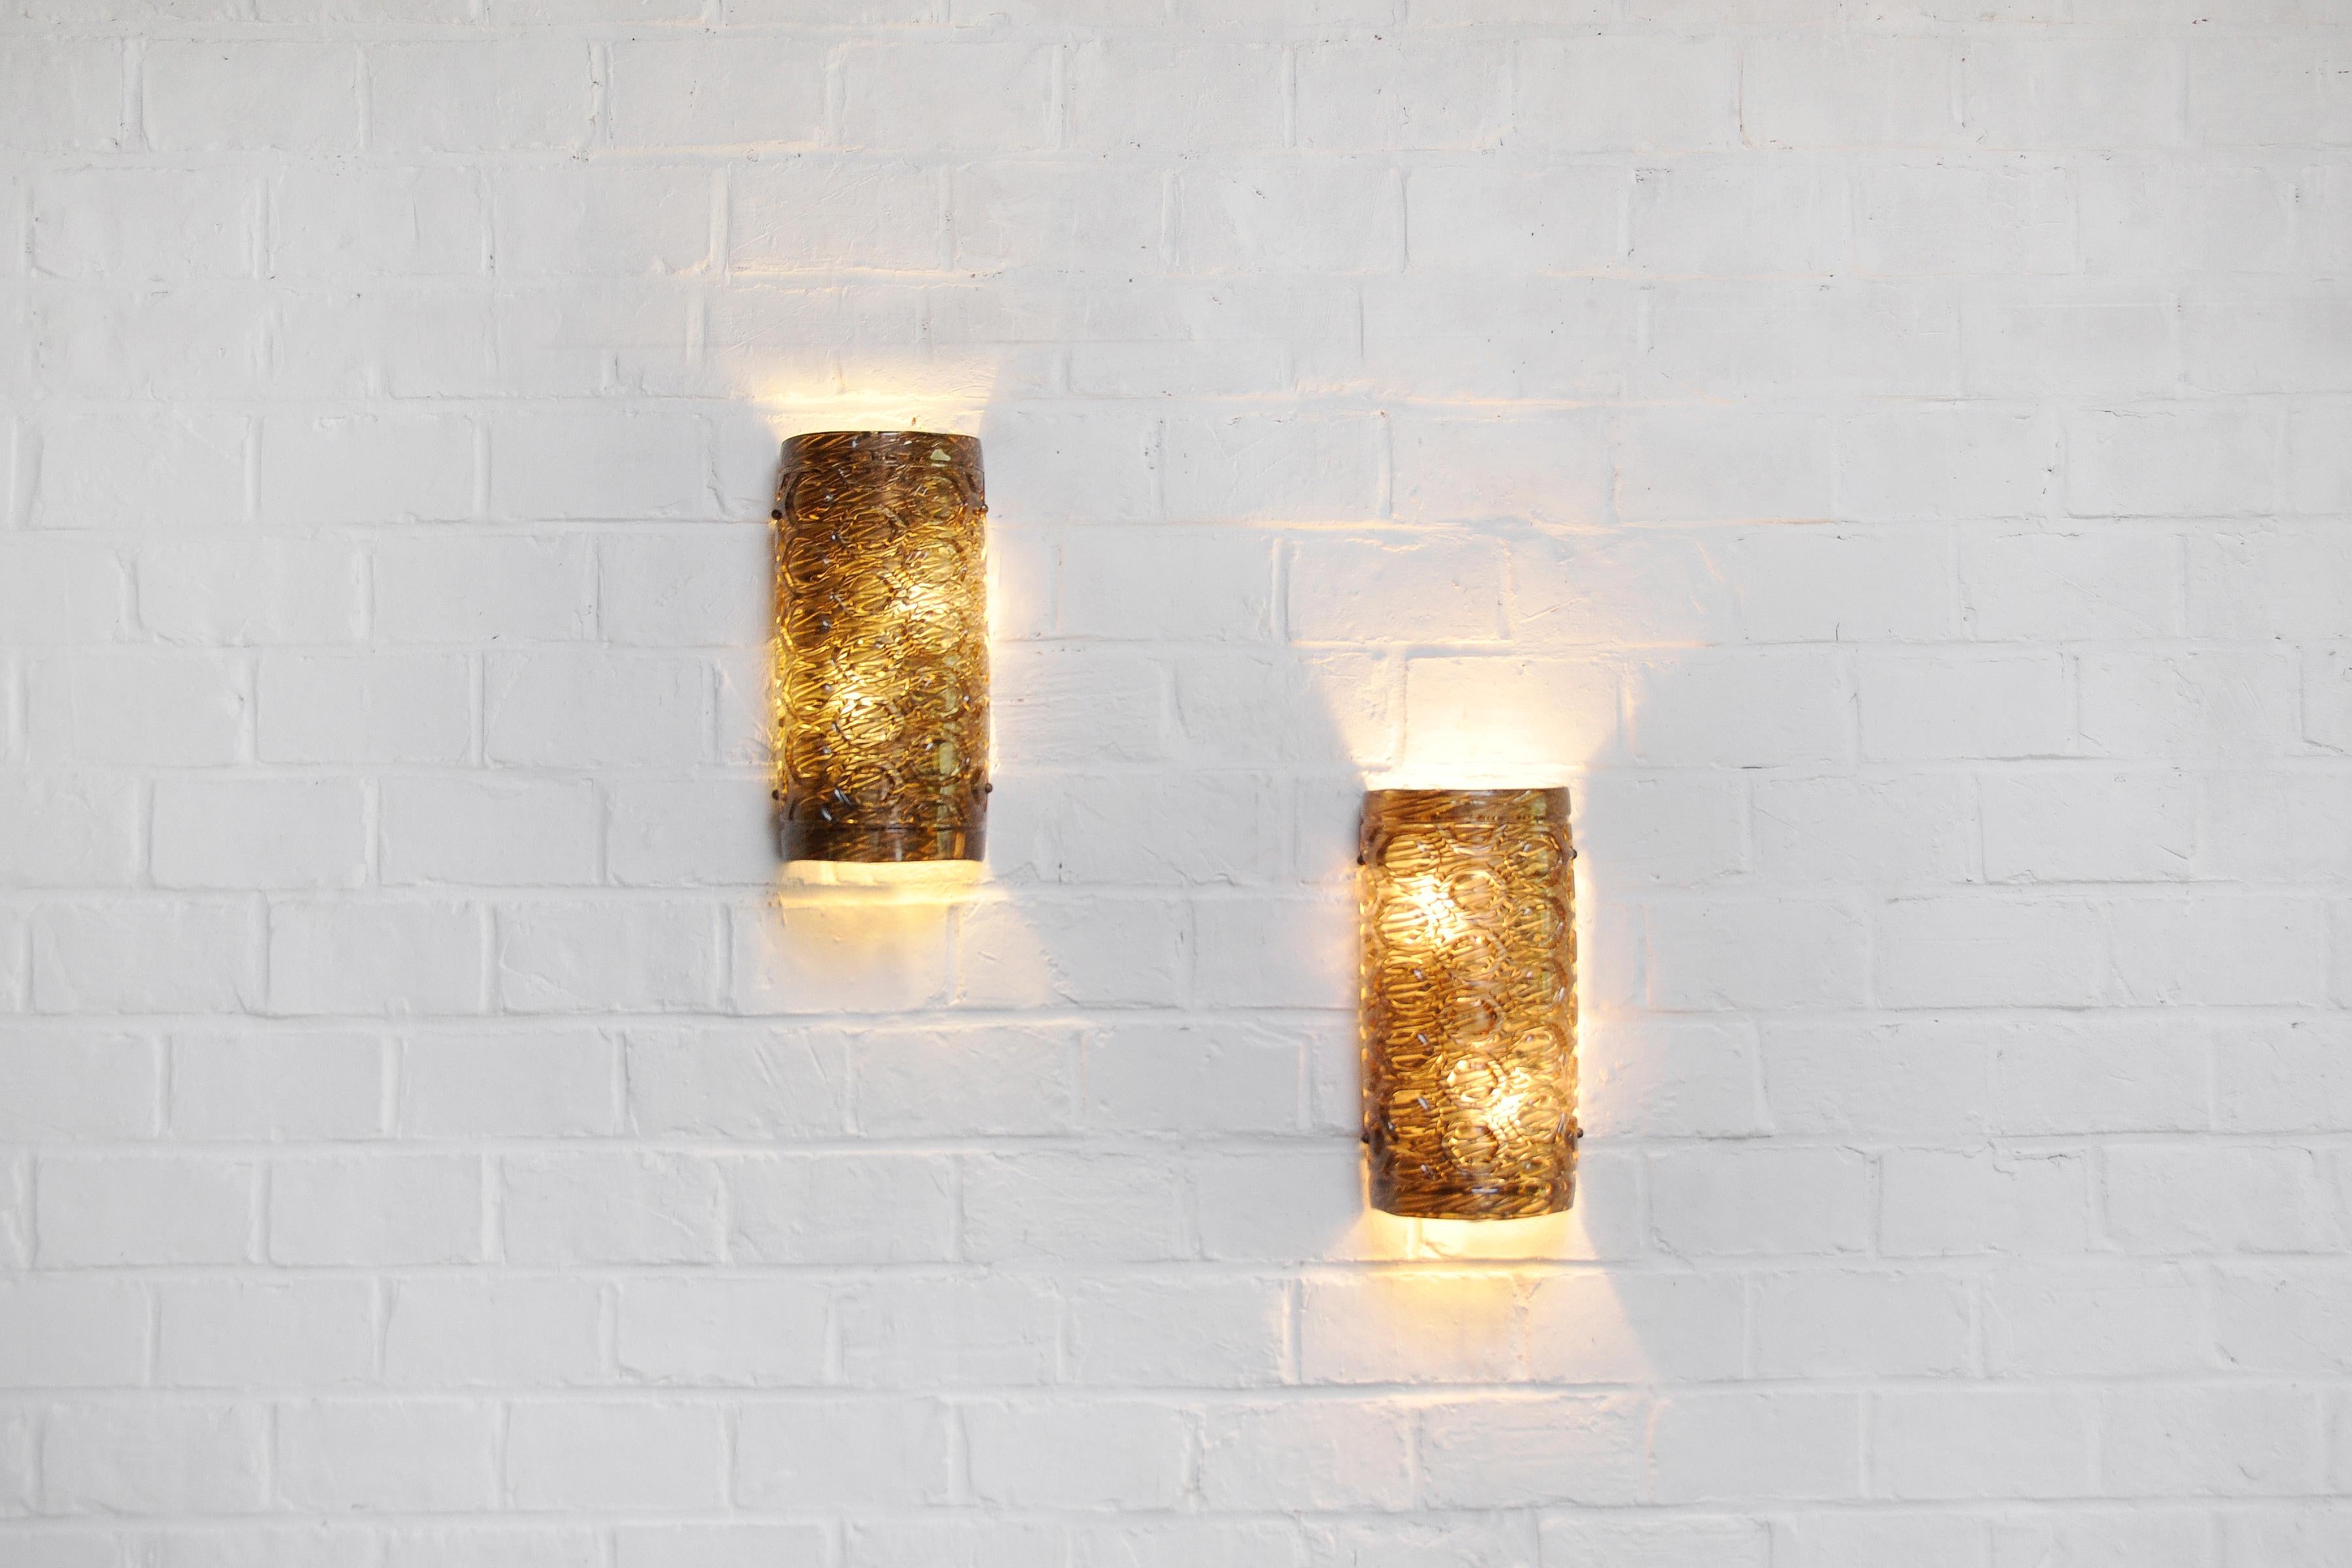 Pair of Italian Murano Glass Wall Lights with Geometric Patterns, 1960's For Sale 1